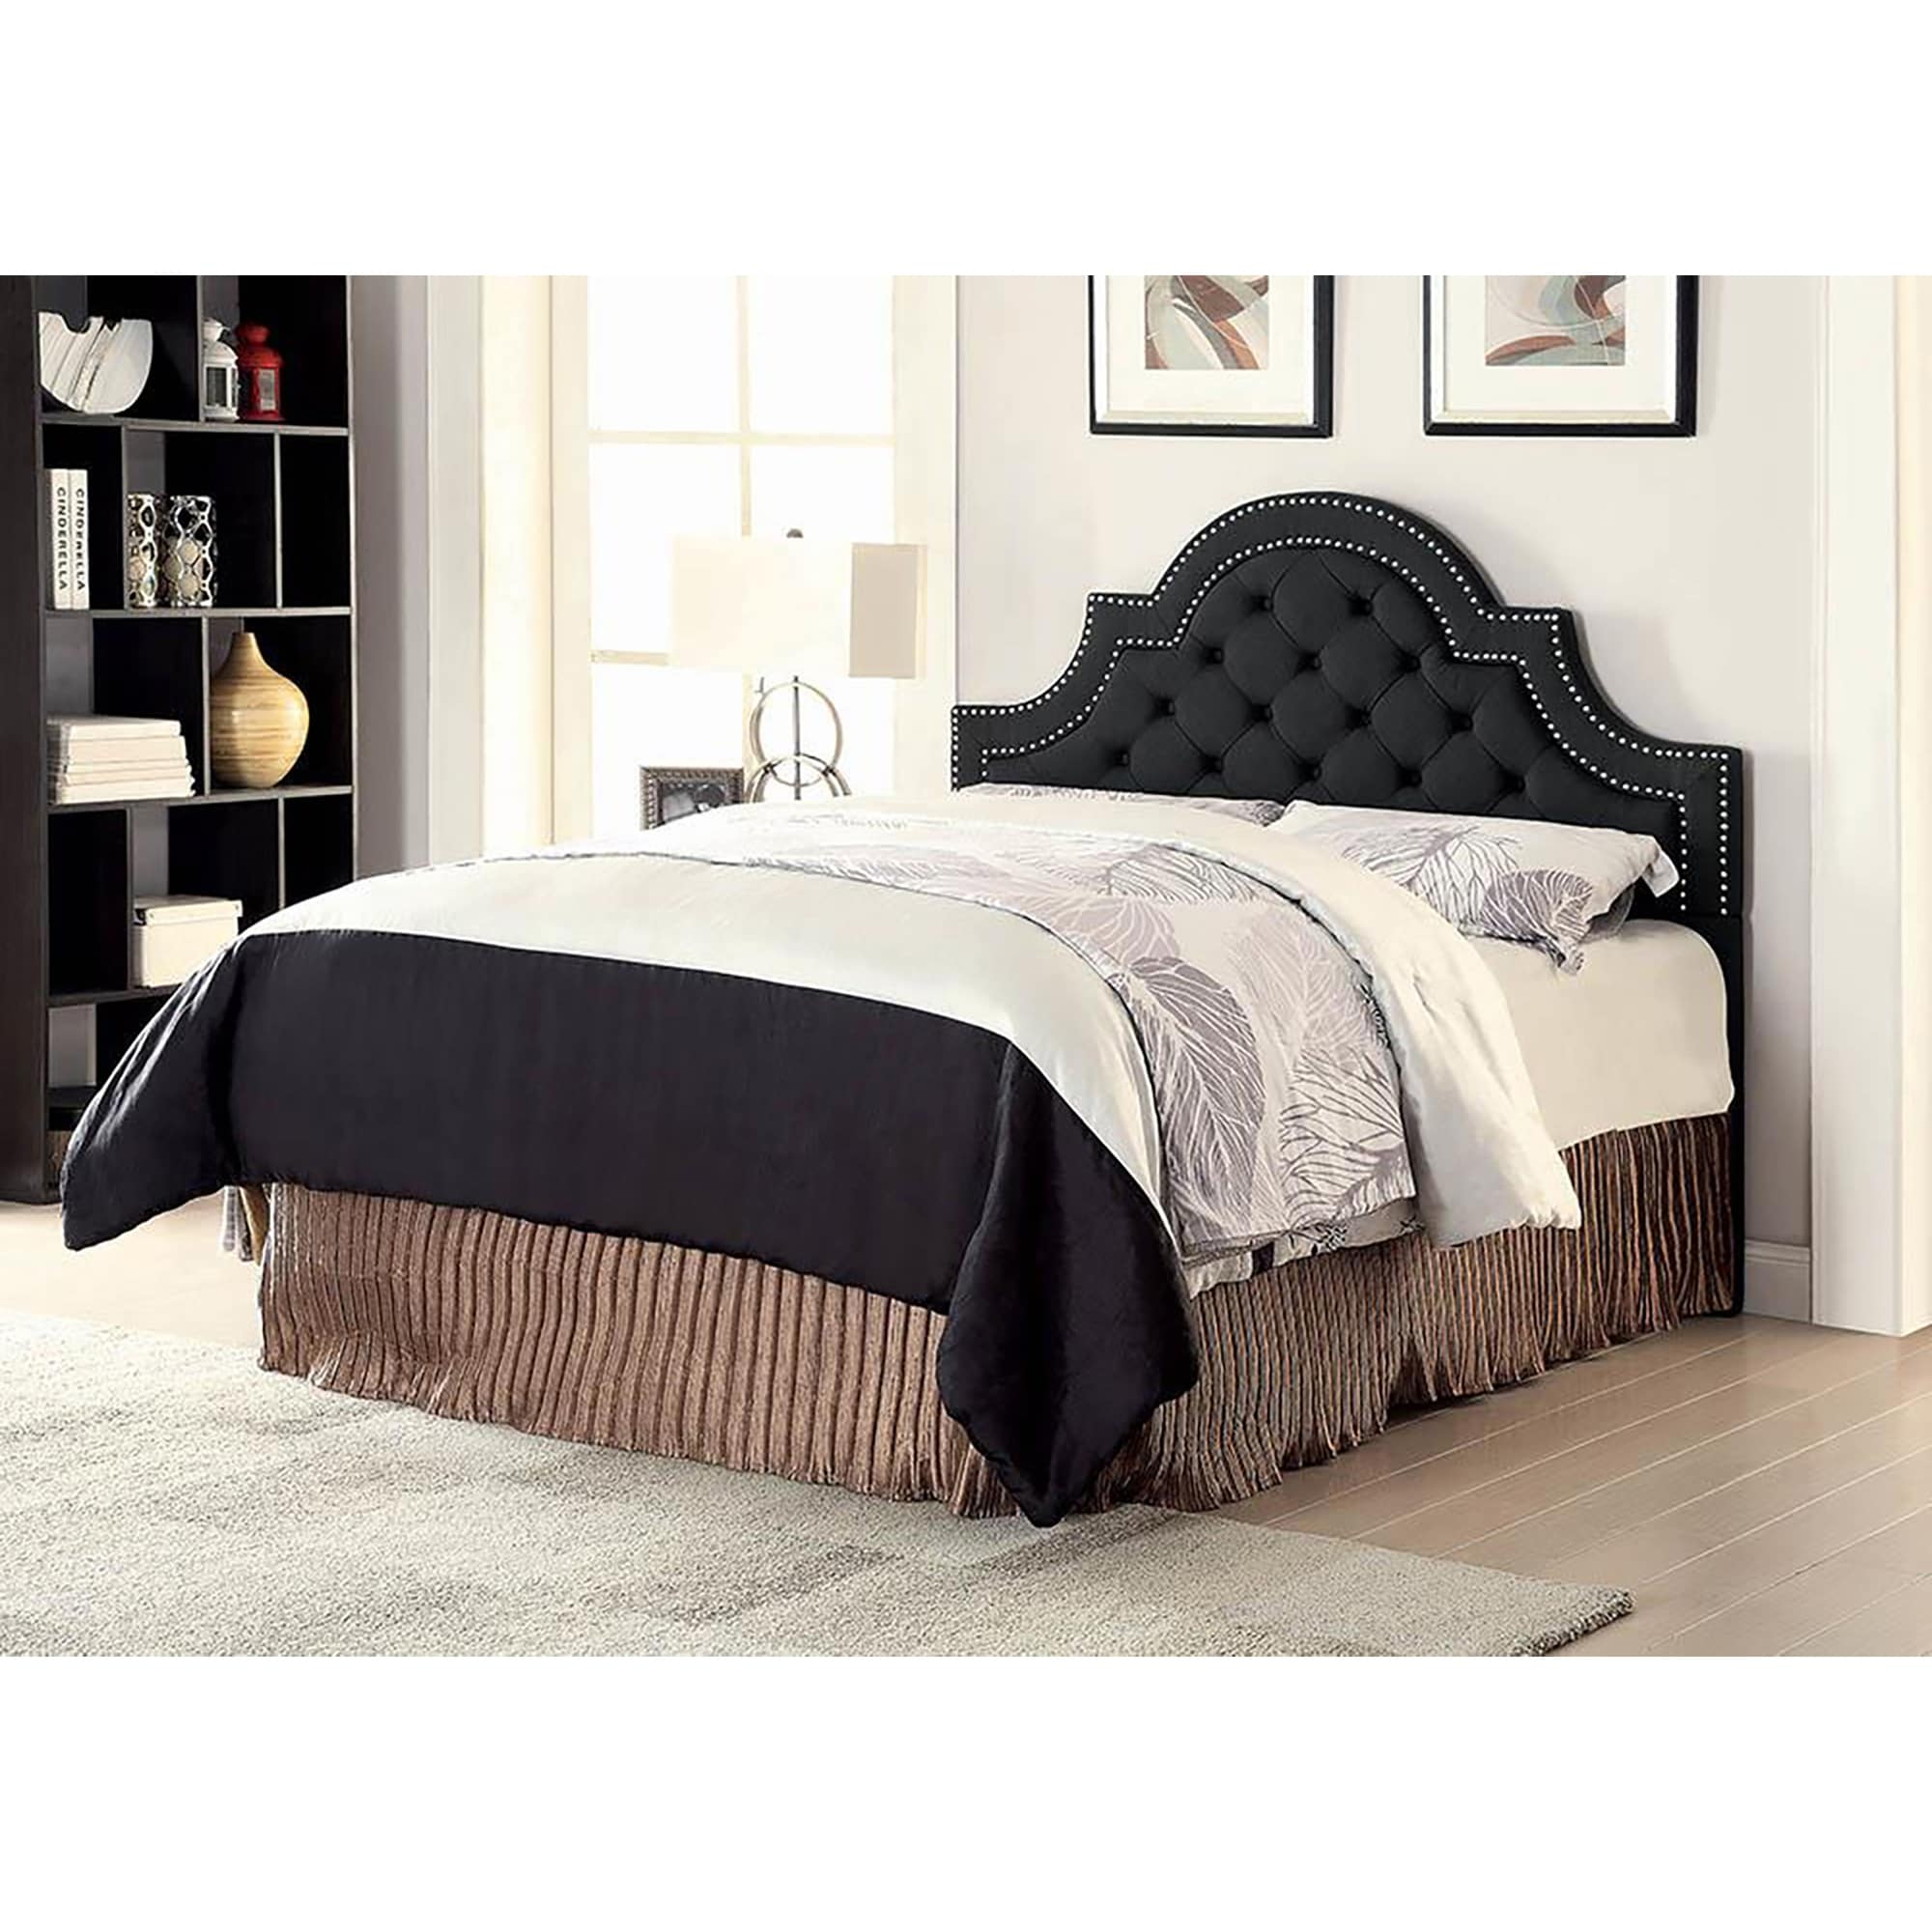 King Size Wood, Traditional Headboards - Bed Bath & Beyond